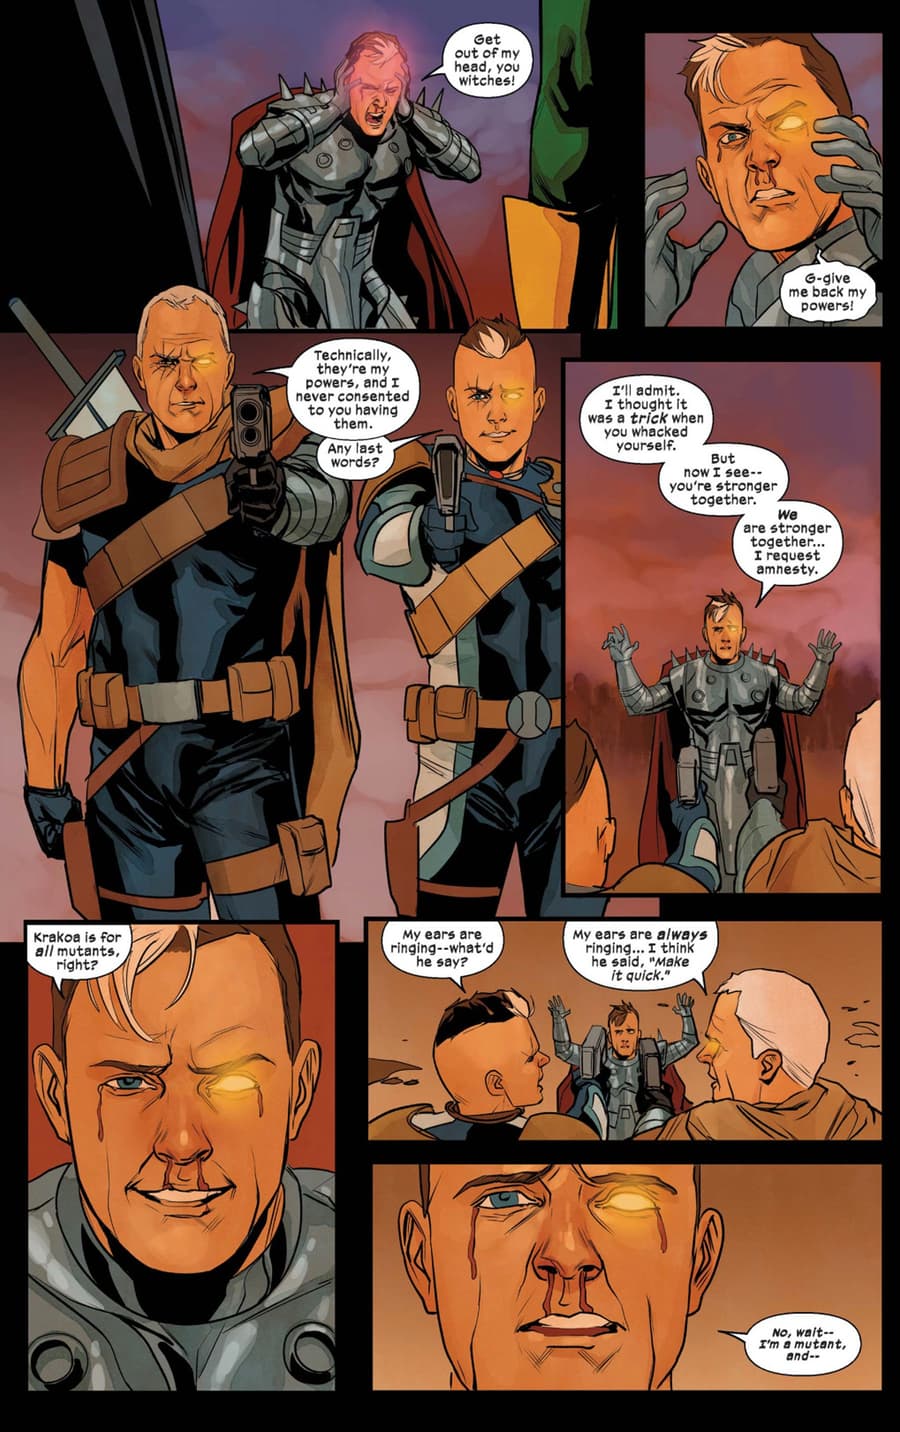 CABLE (2020) #12 page by Gerry Duggan and Phil Noto